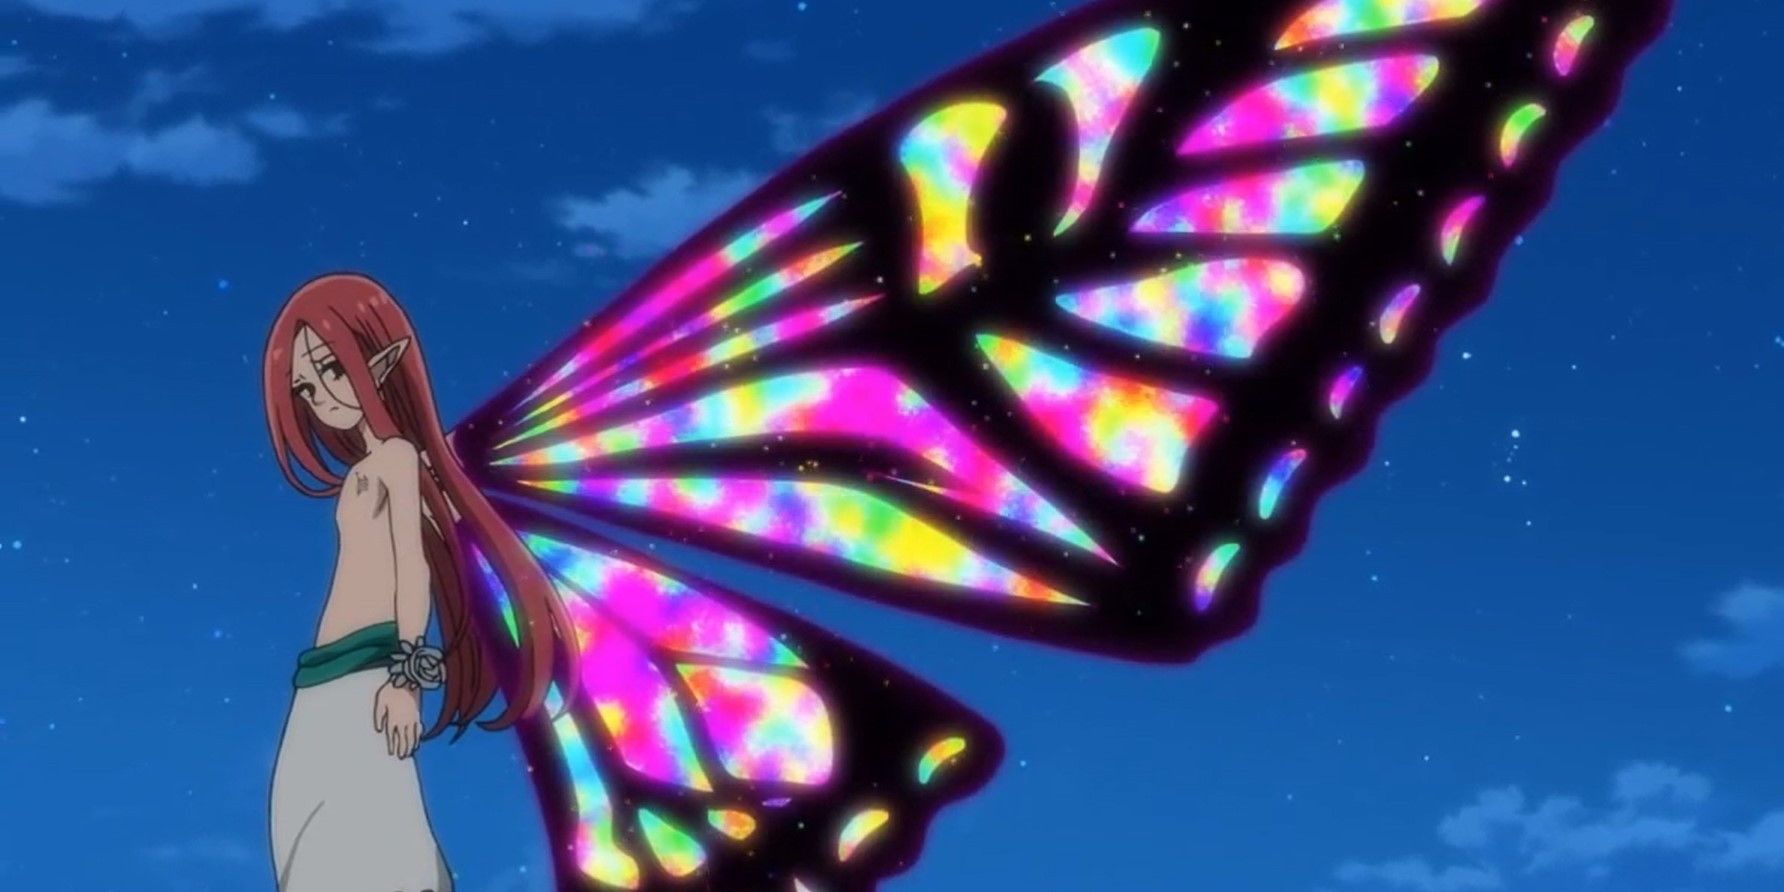 Gloxinia hovers in the sky while sporting rainbow-colored butterfly wings in The Seven Deadly Sins